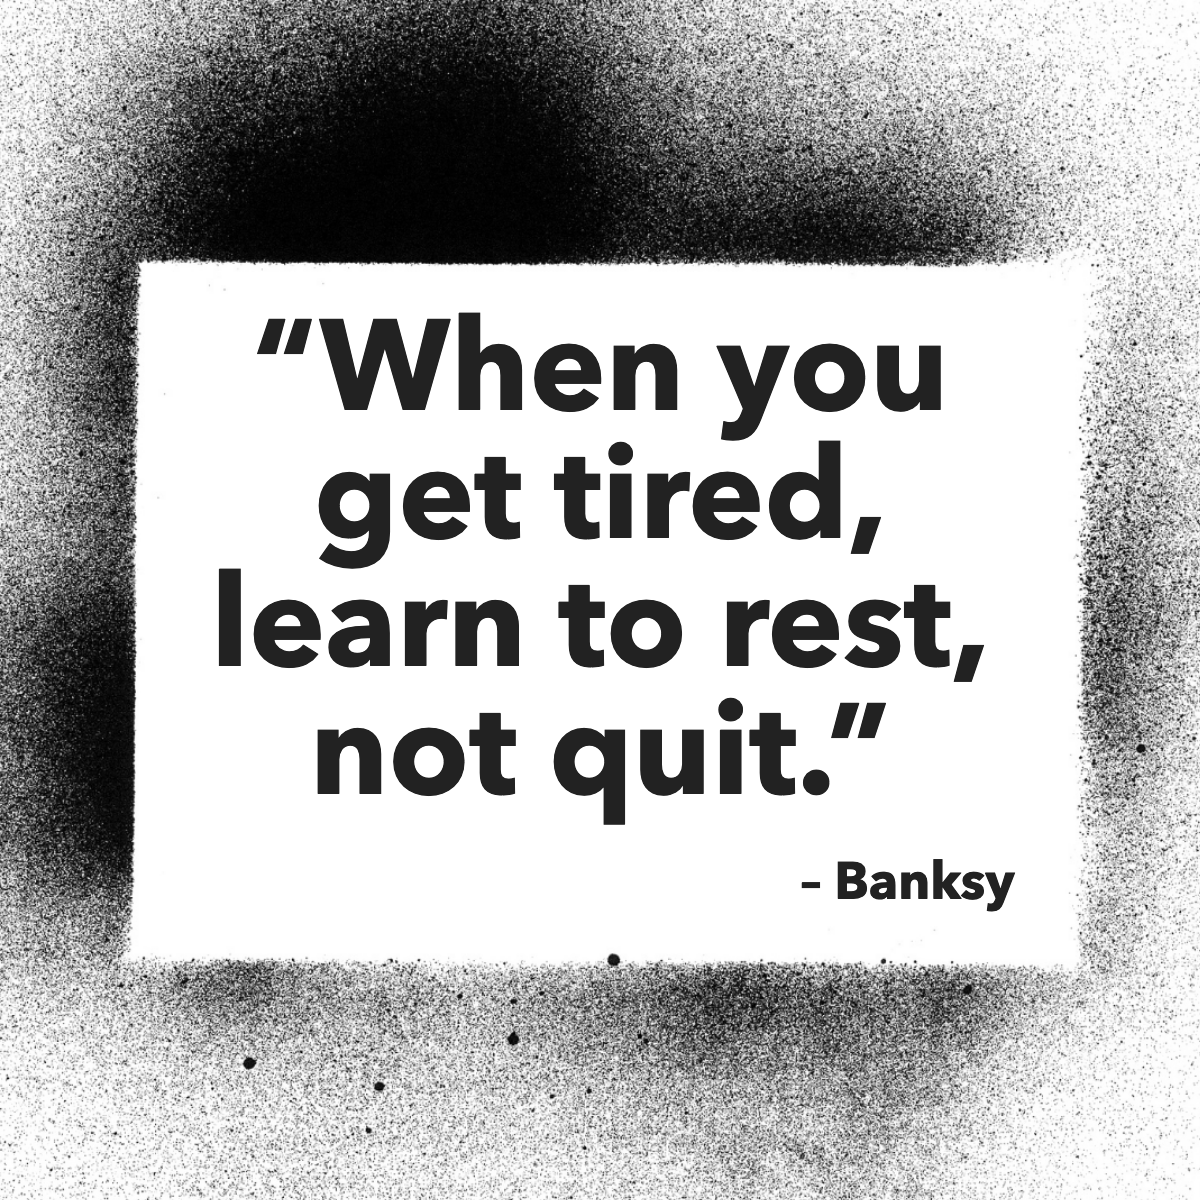 Don't feel guilty if you ever get tired, take your time ... 😉

#motivationnation #motivationalquotesdaily #quoteoftheday #quoteofday #quotedaily